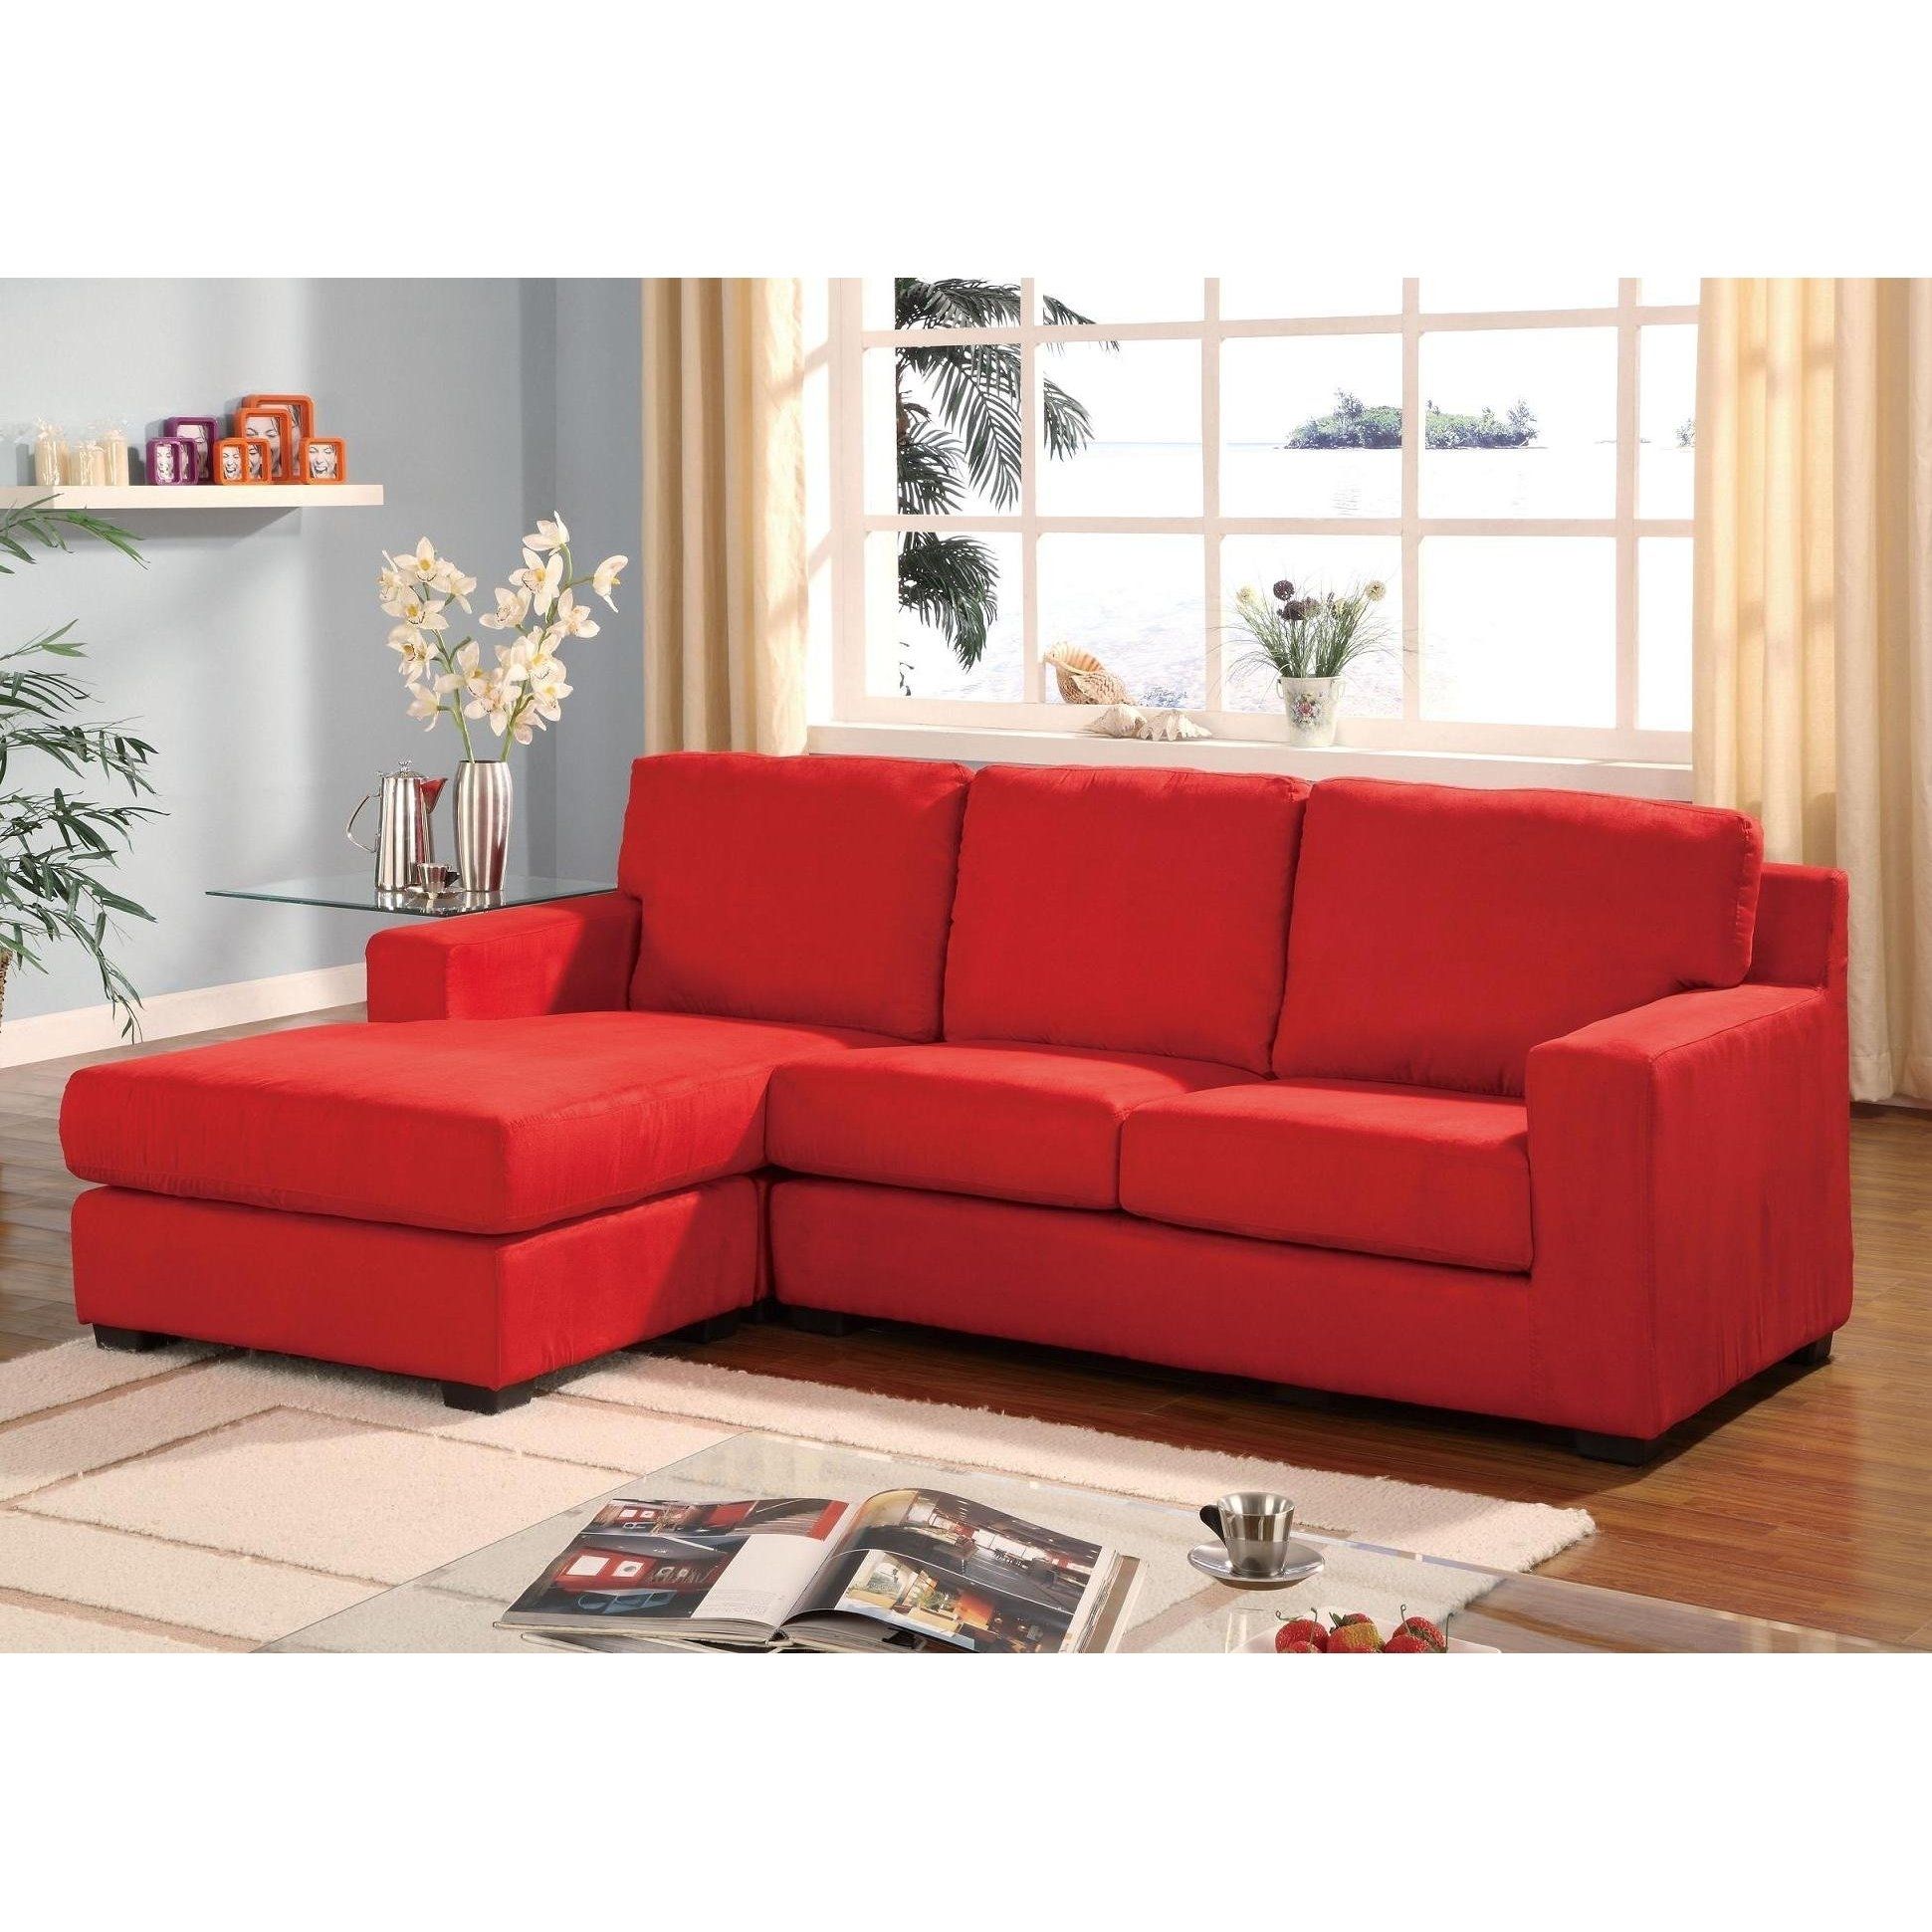 Sofas: Red Sectional Sofa | Reclining Sectional Sofas For Small Inside Red Leather Sectionals With Chaise (View 9 of 15)